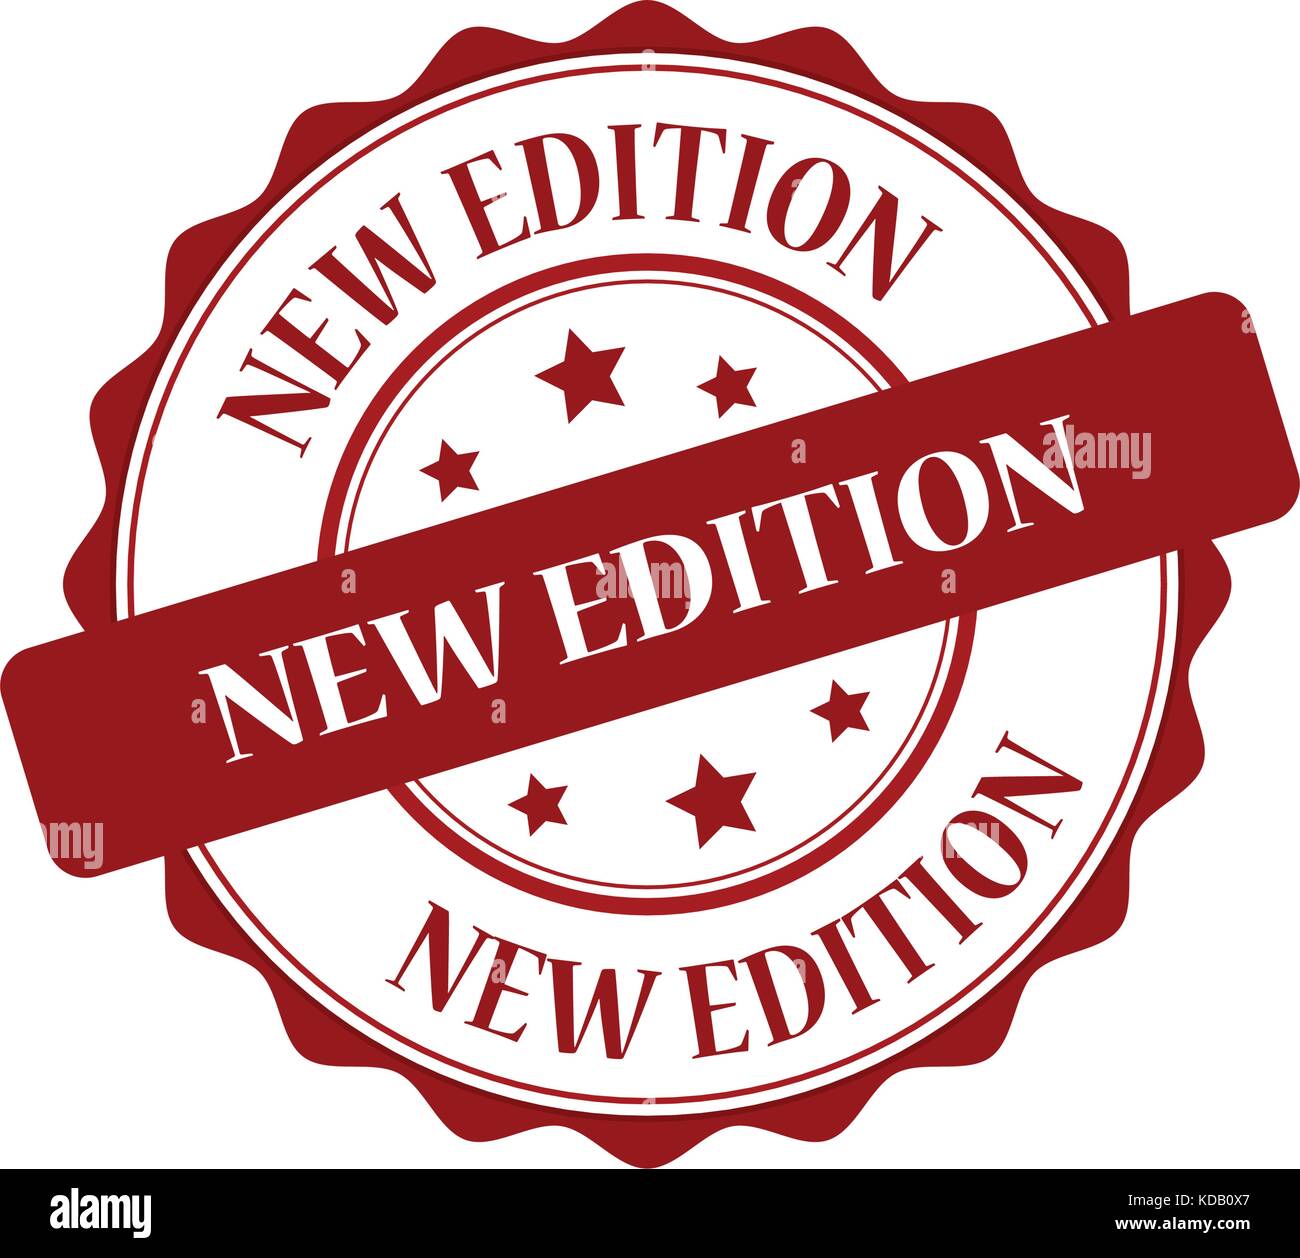 New edition red stamp illustration Stock Vector